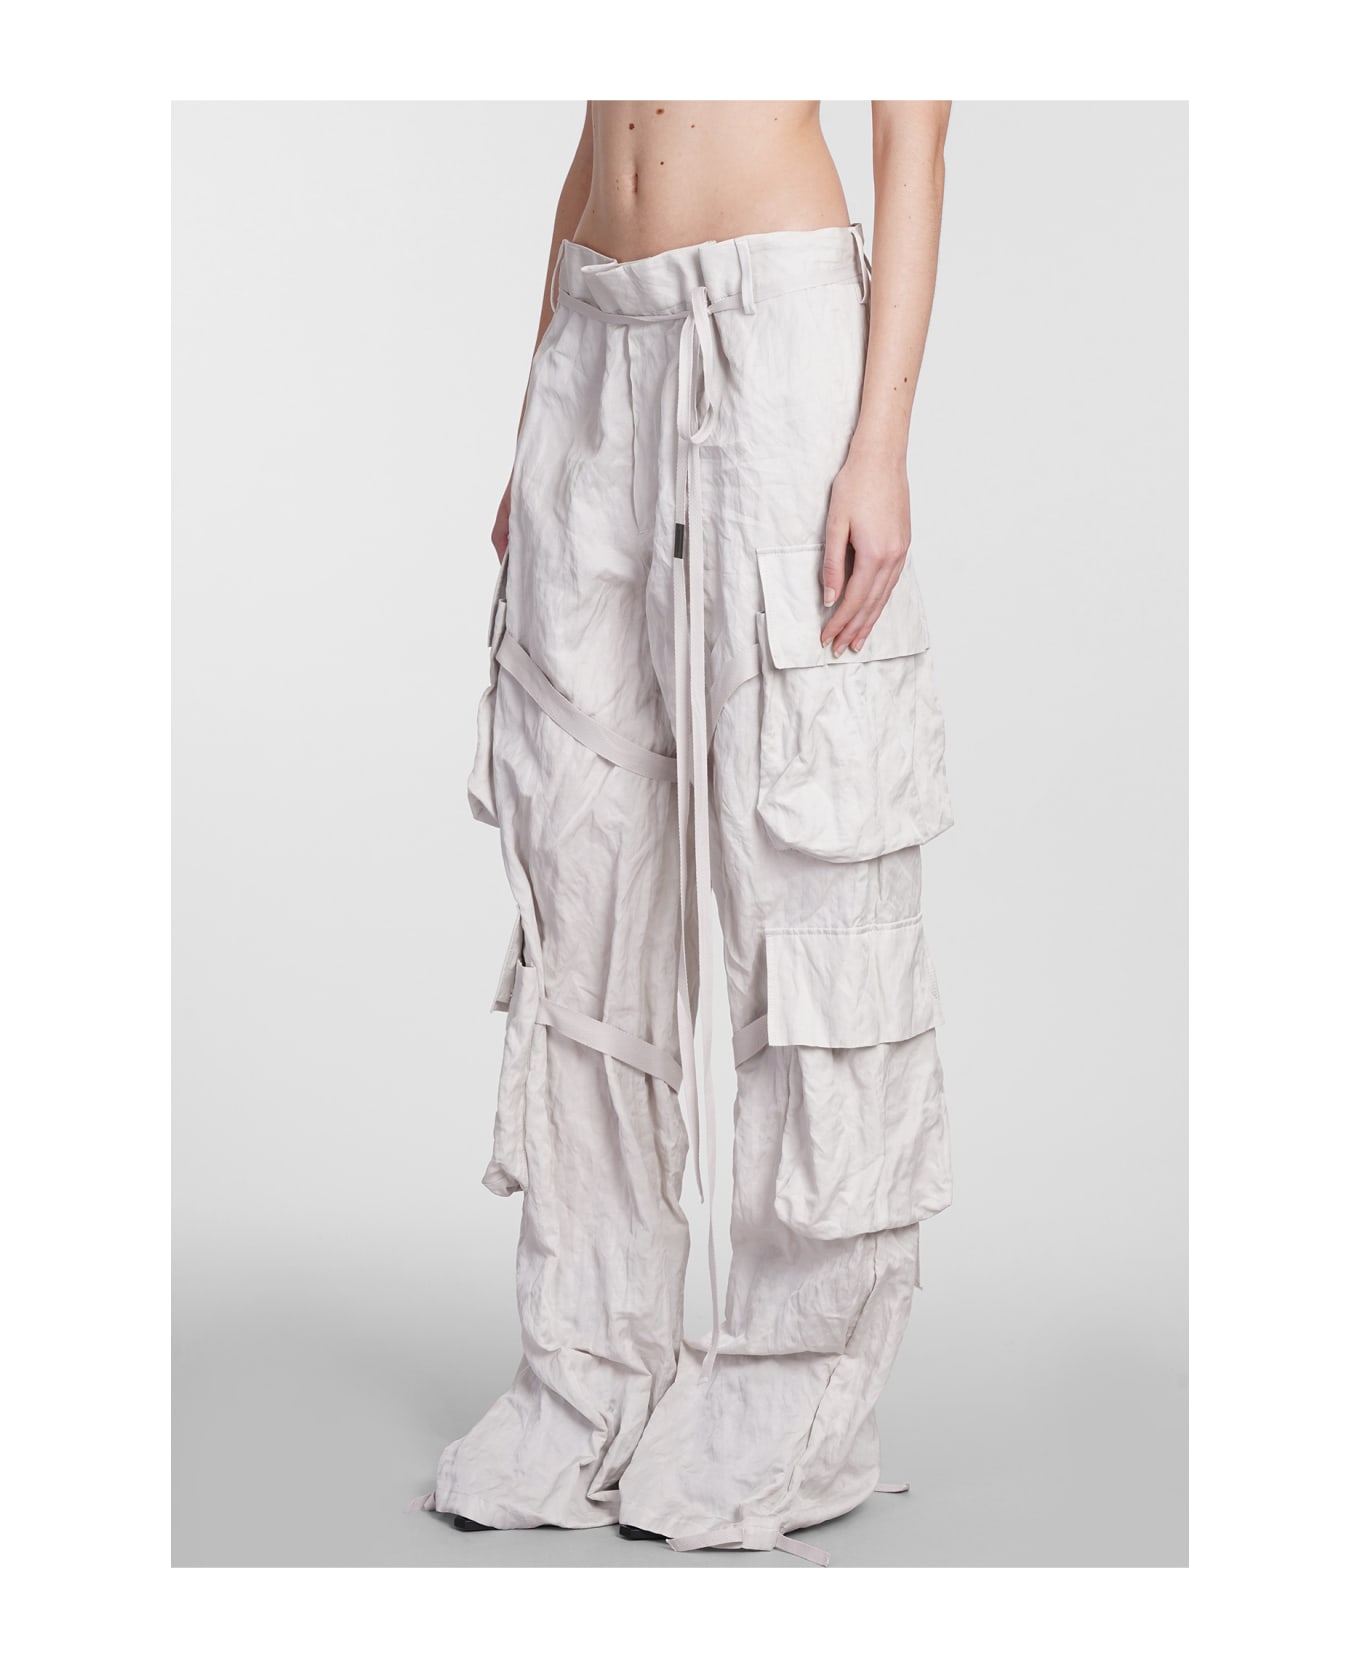 Ann Demeulemeester Pants In Grey Cotton - GREY ボトムス